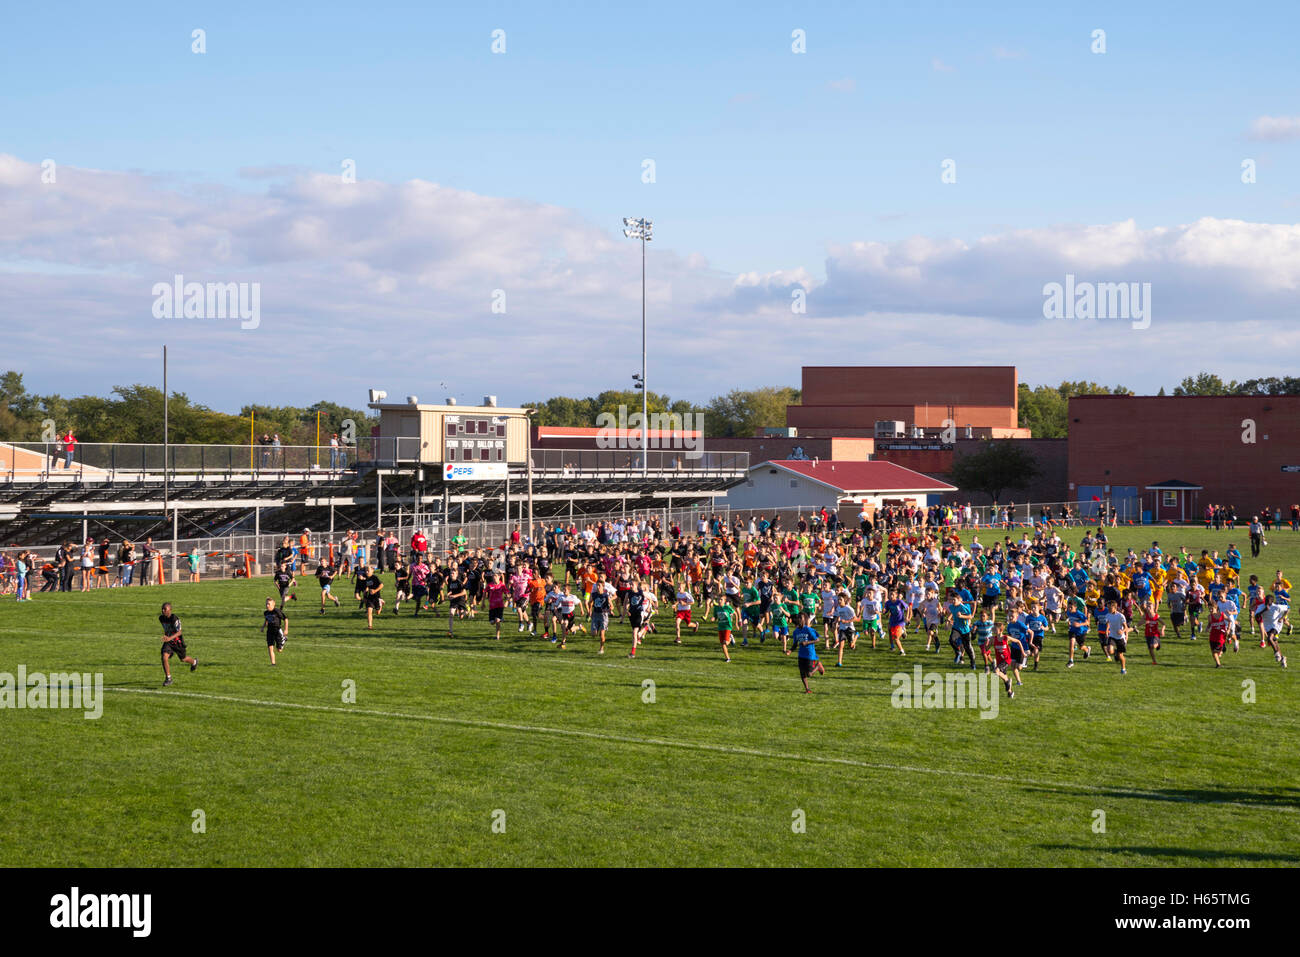 Photographs of a middle school cross country meet held in Verona